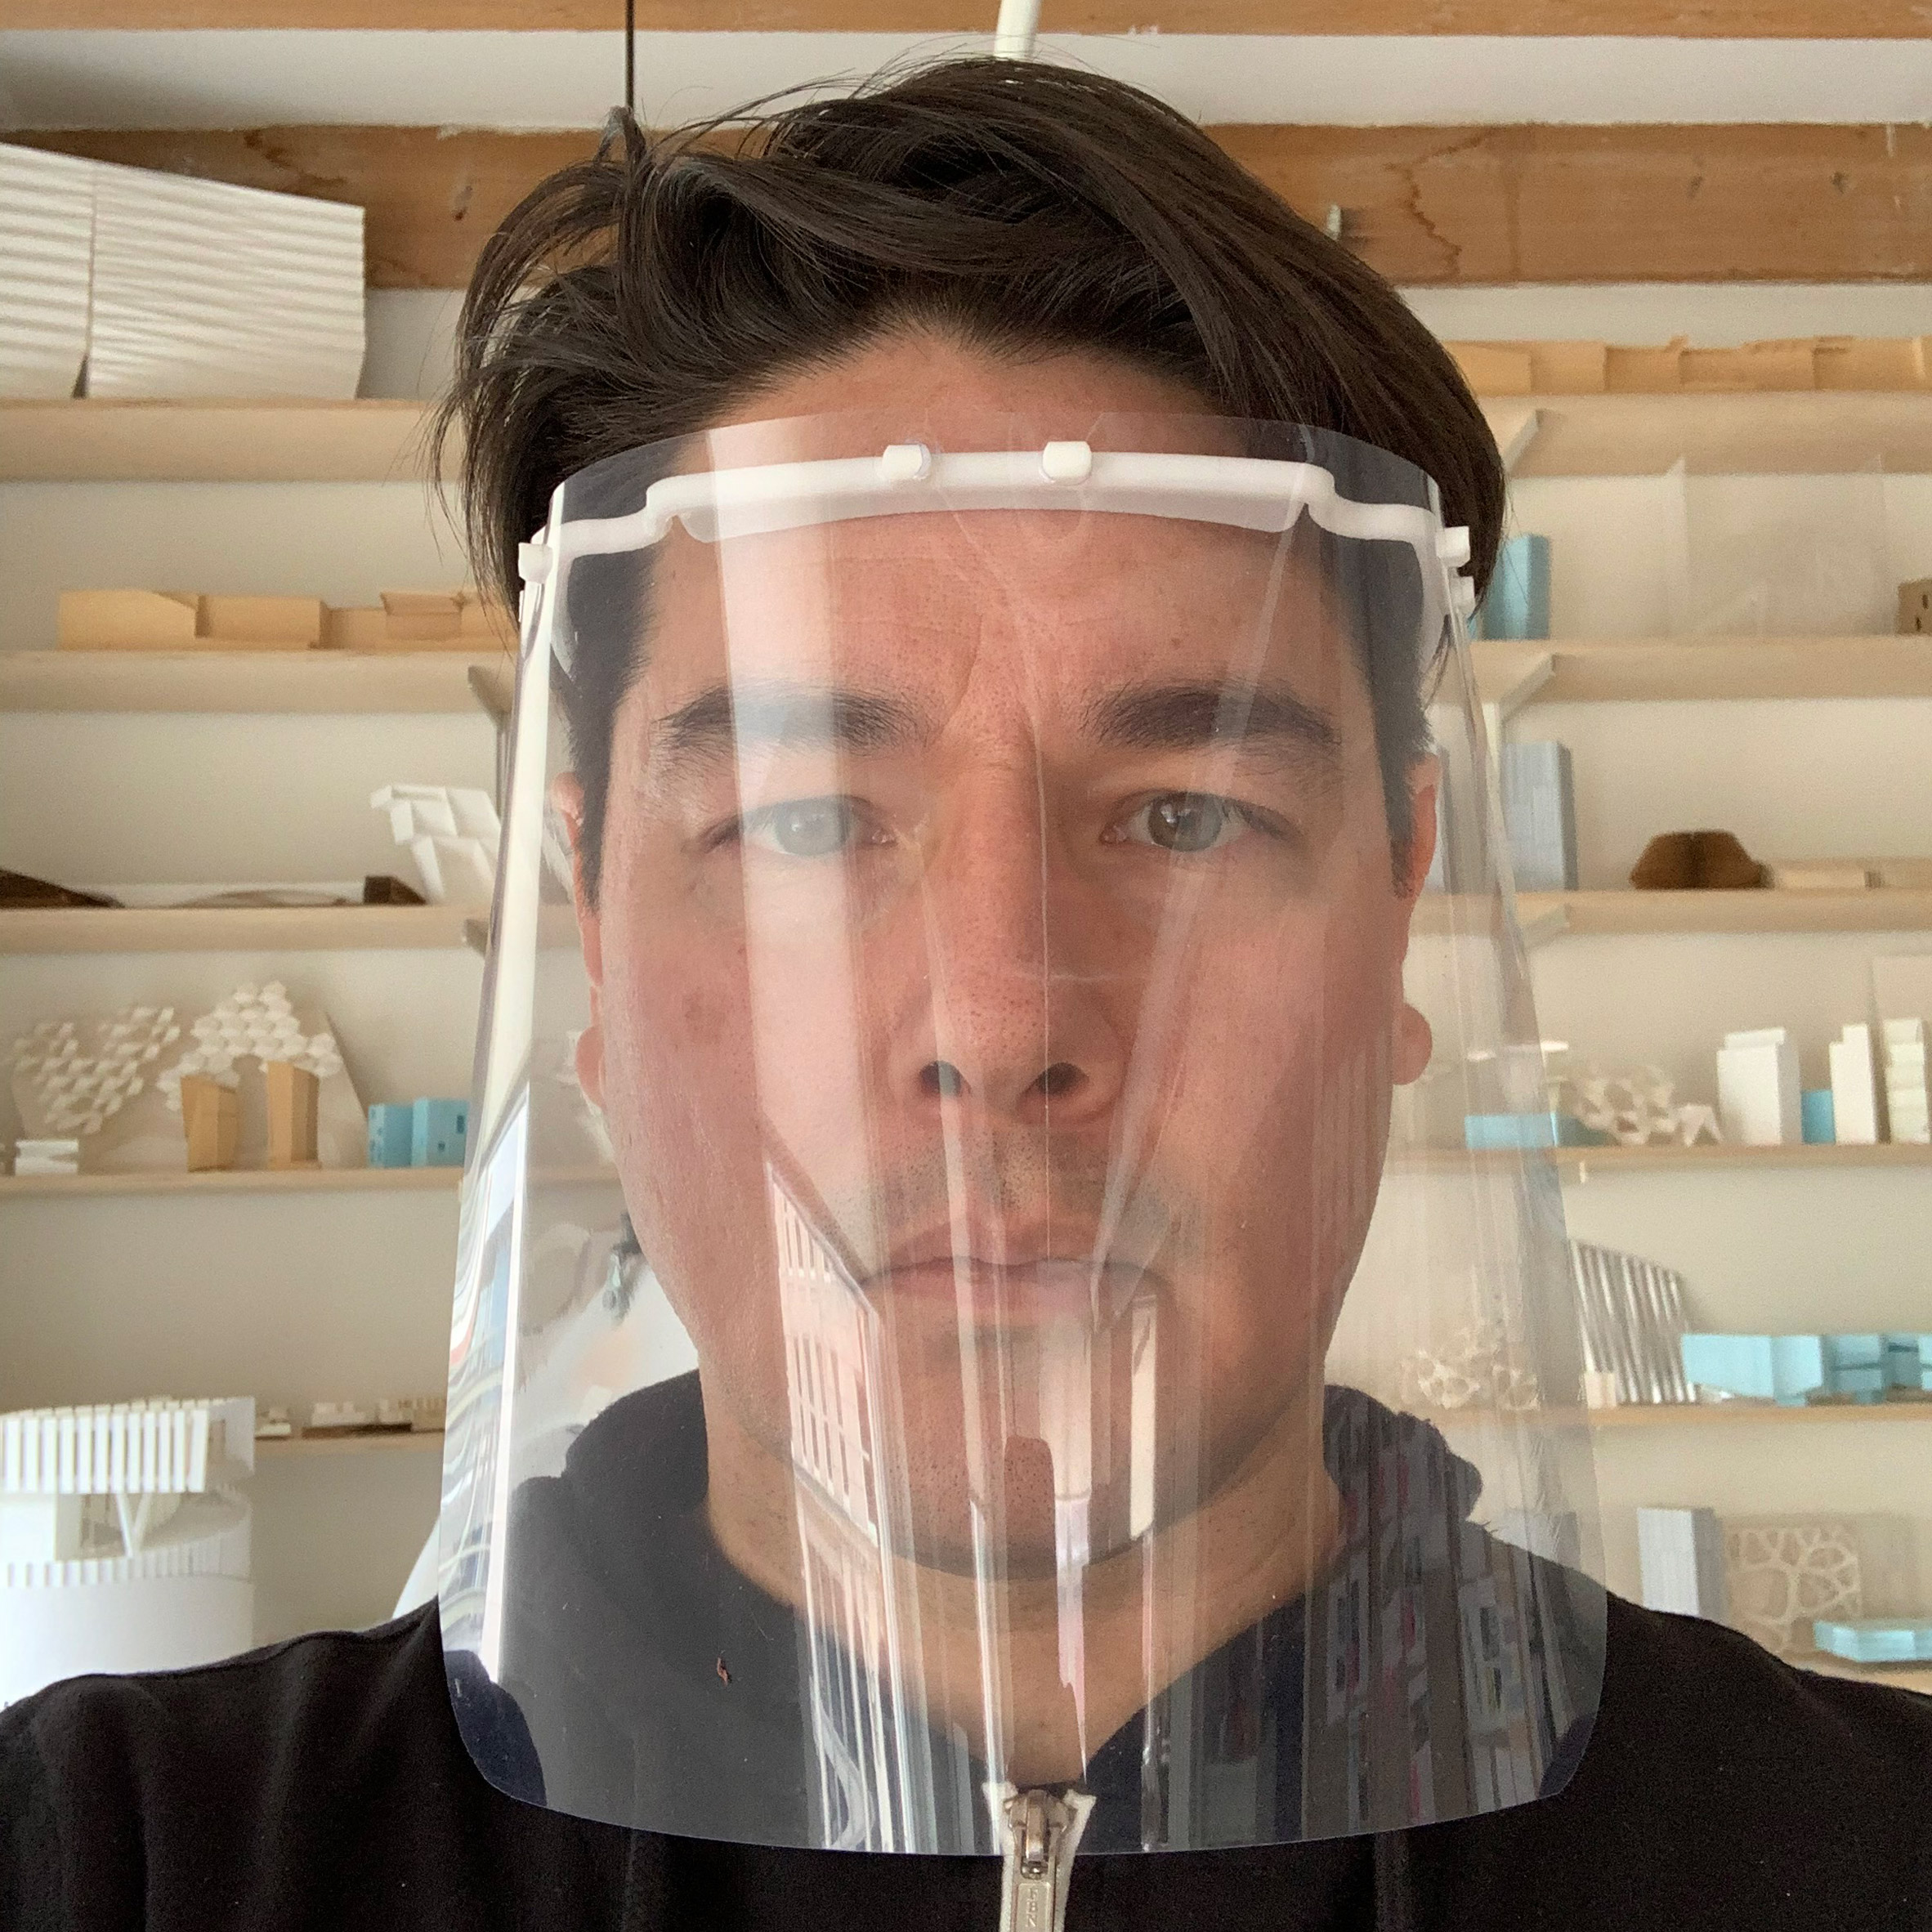 American Architects Mobilise To Make Coronavirus Face Shields For Hospitals